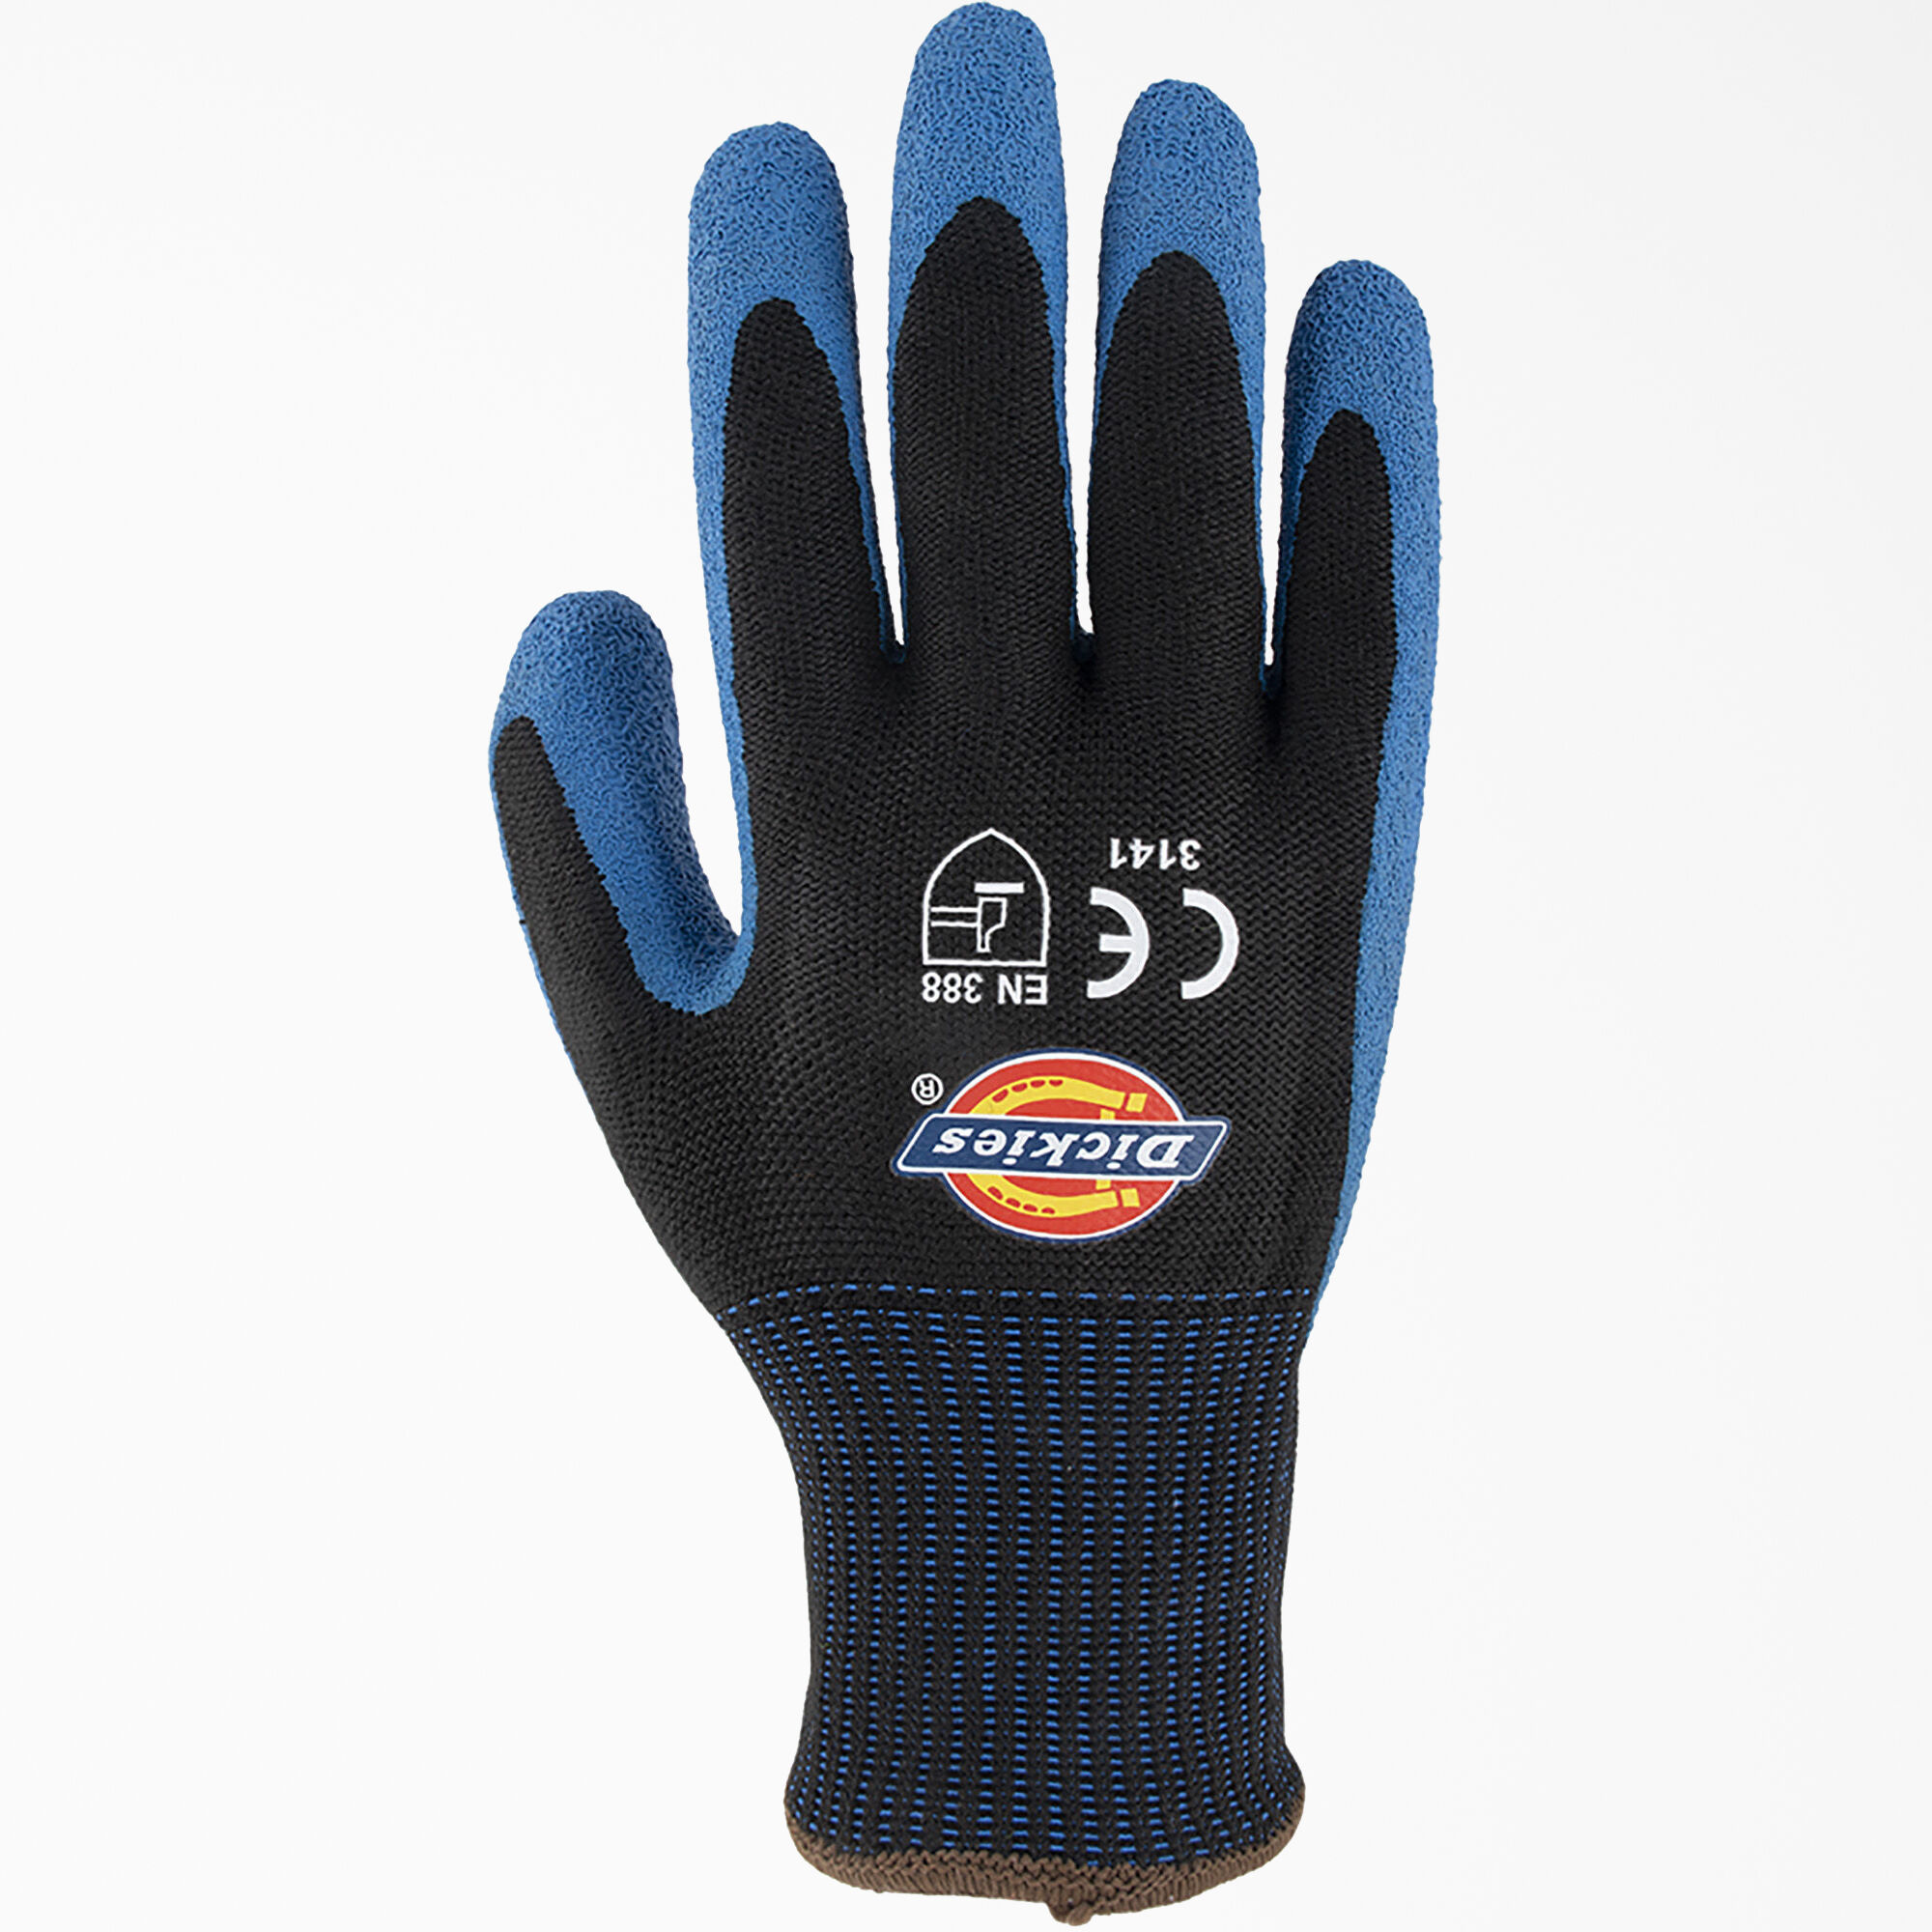 Dickies Handschuhe Gloves Lined Leather Brown 